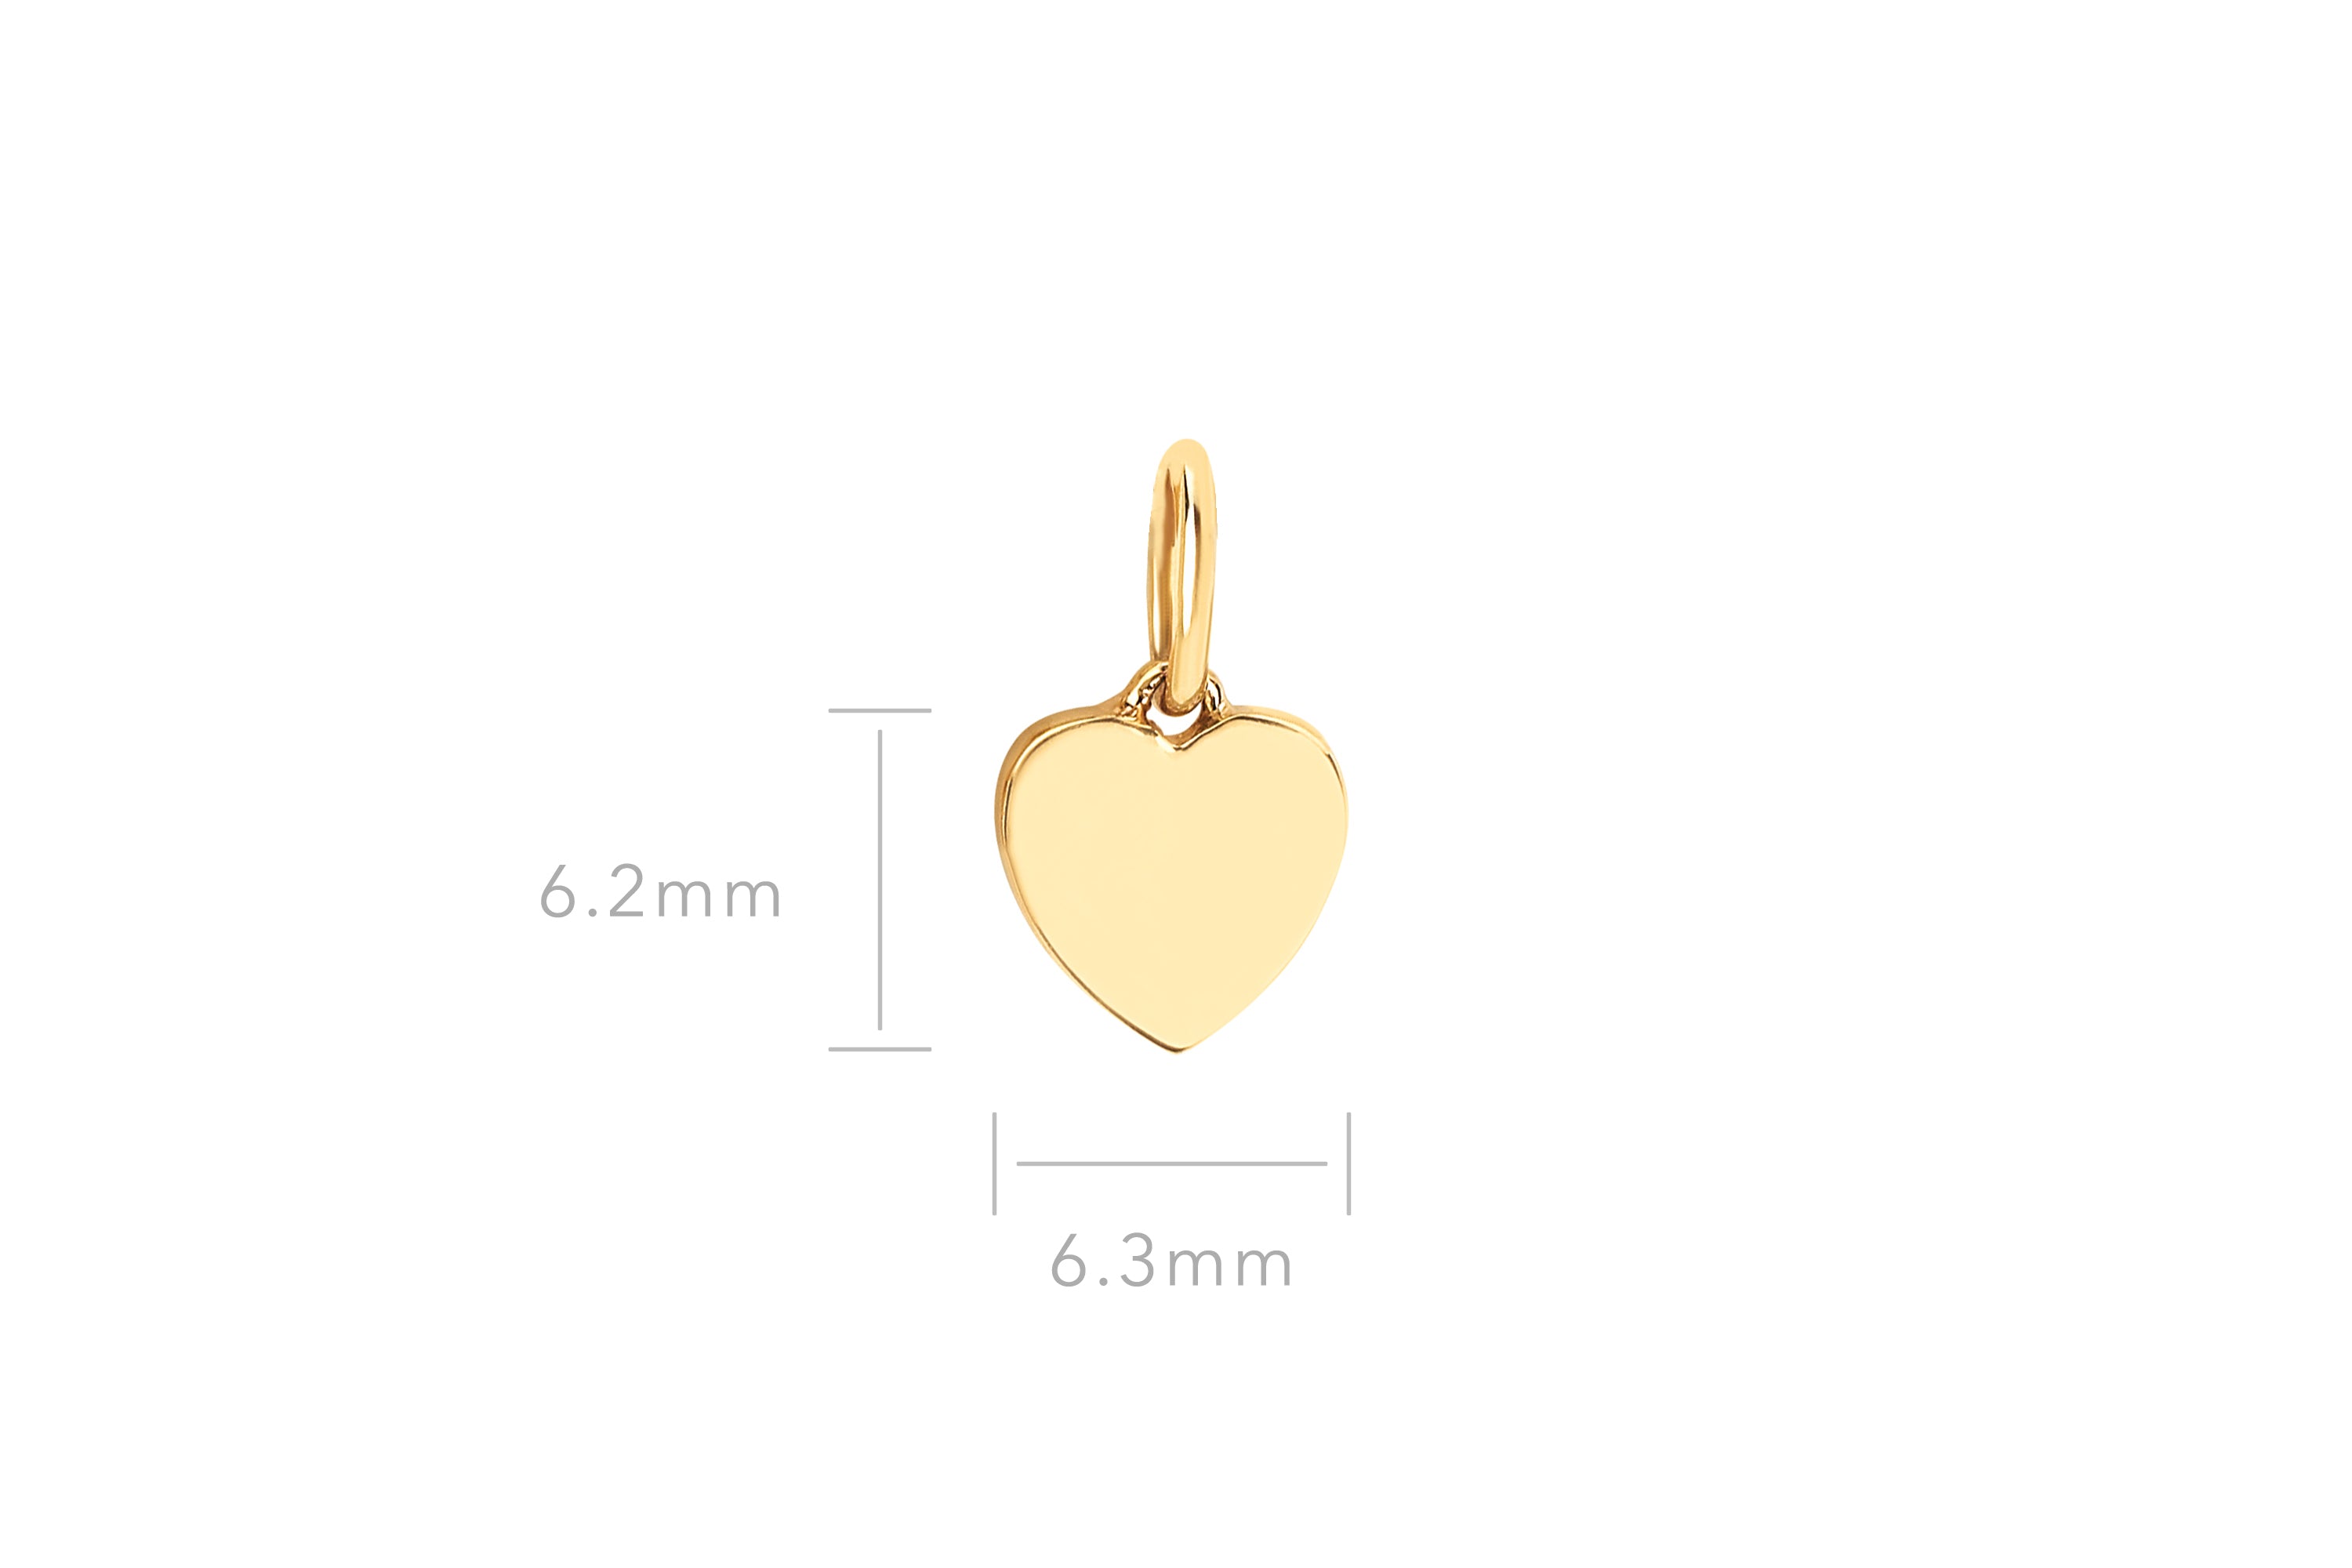 Gold Heart Necklace Charm in 14k yellow gold